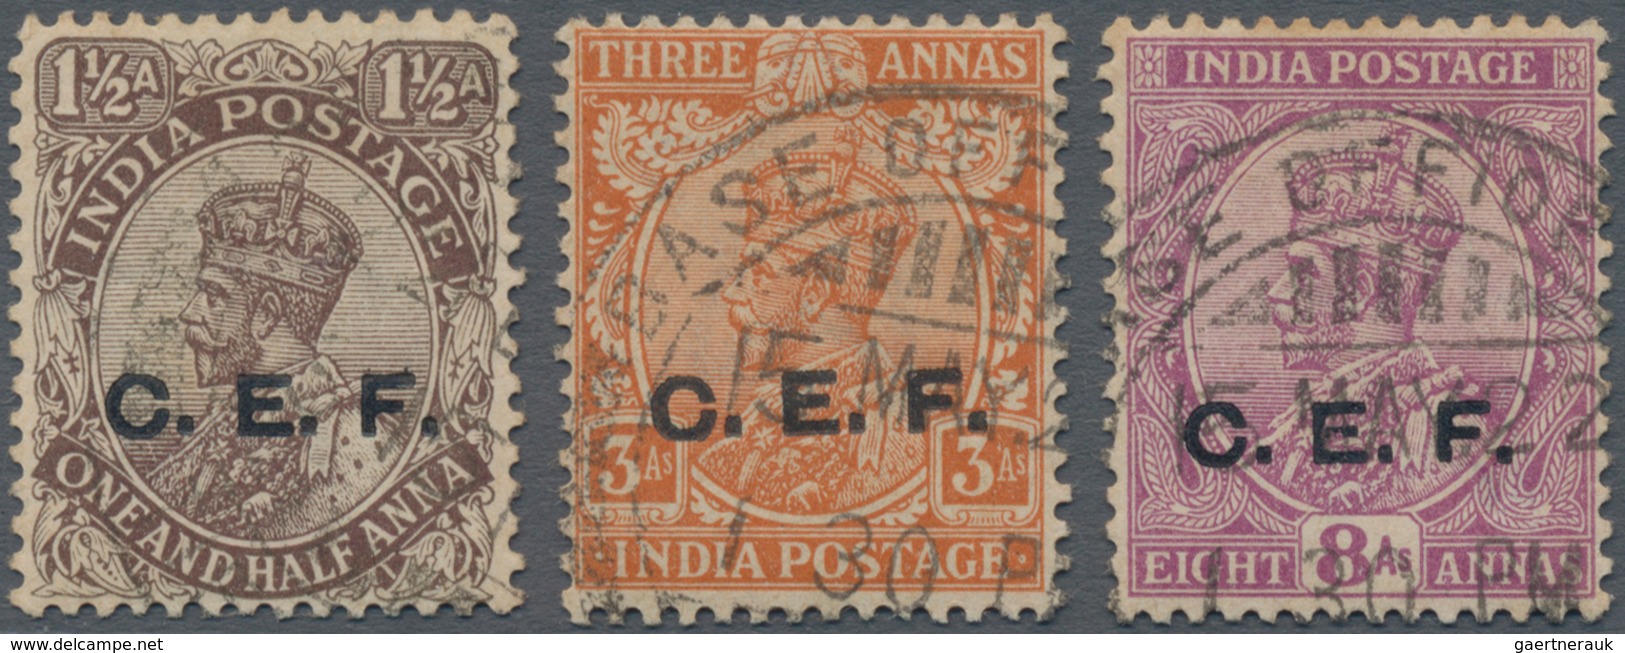 Indien - Feldpost: 1914-22 Chinese Exped. Force C.E.F.: Three KGV. Stamps Denom. 1a3p., 3a. And 8a. - Military Service Stamp